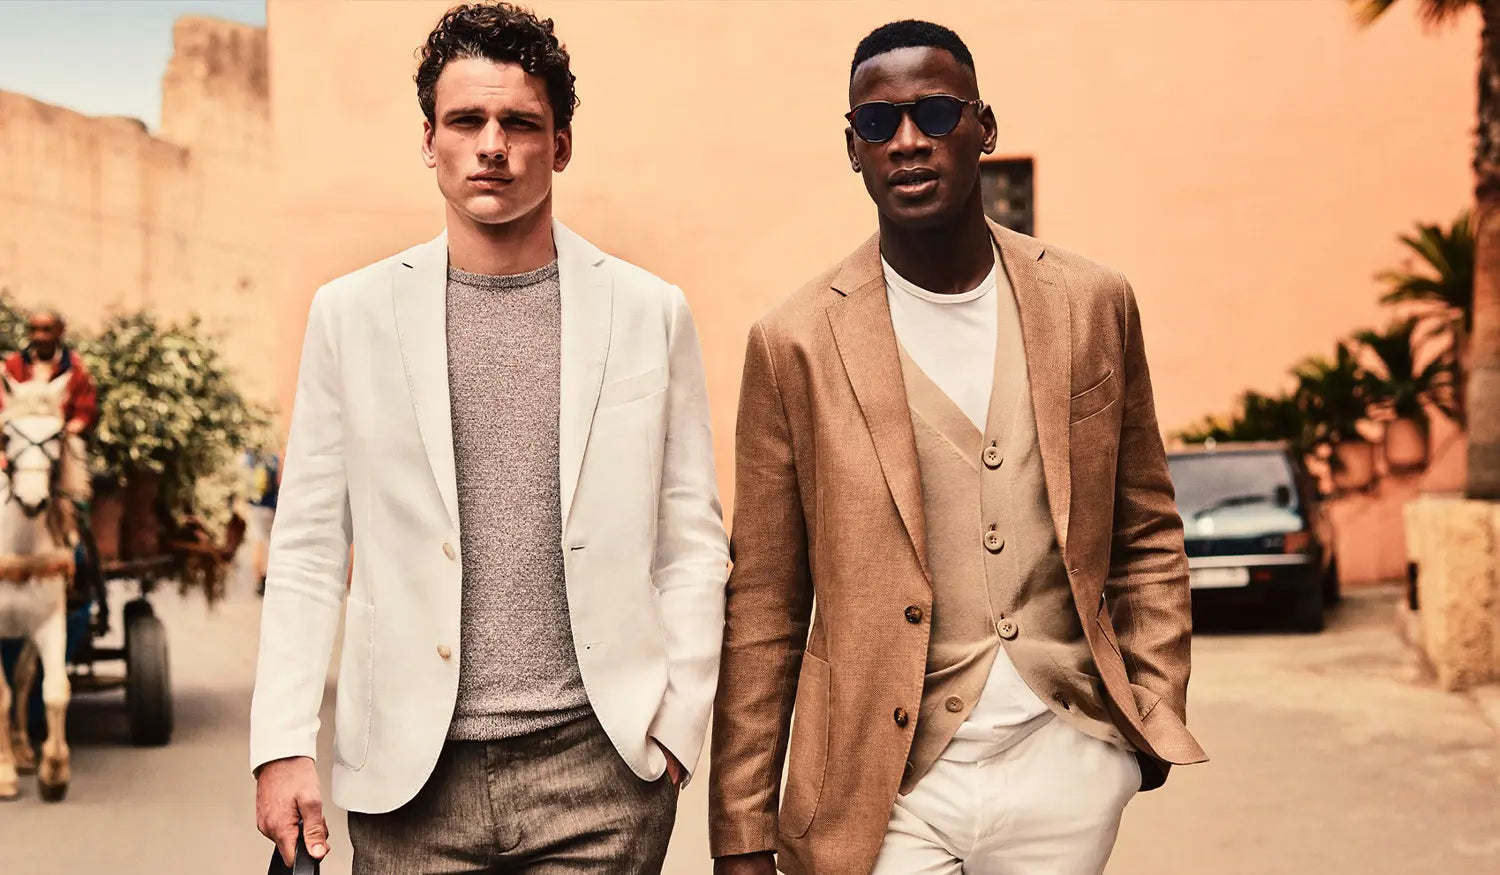 What Colors Complement Your Skin Tone in Men's Clothing?